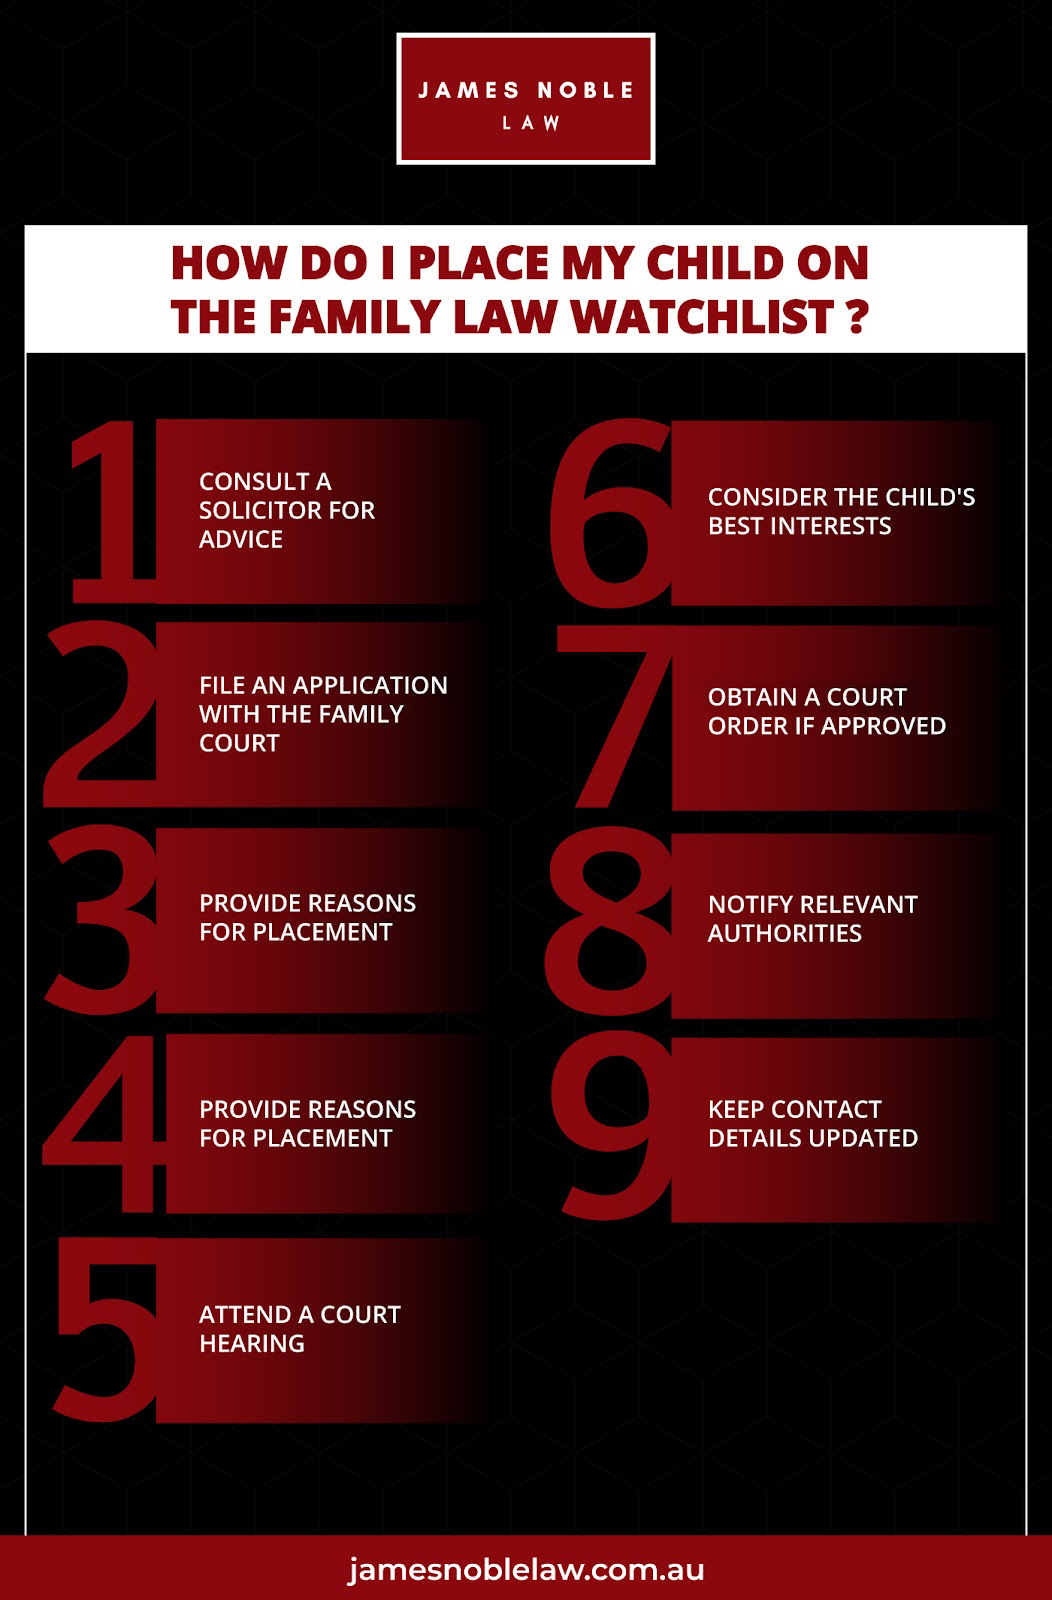 How do I place my child on the Family Law Watchlist